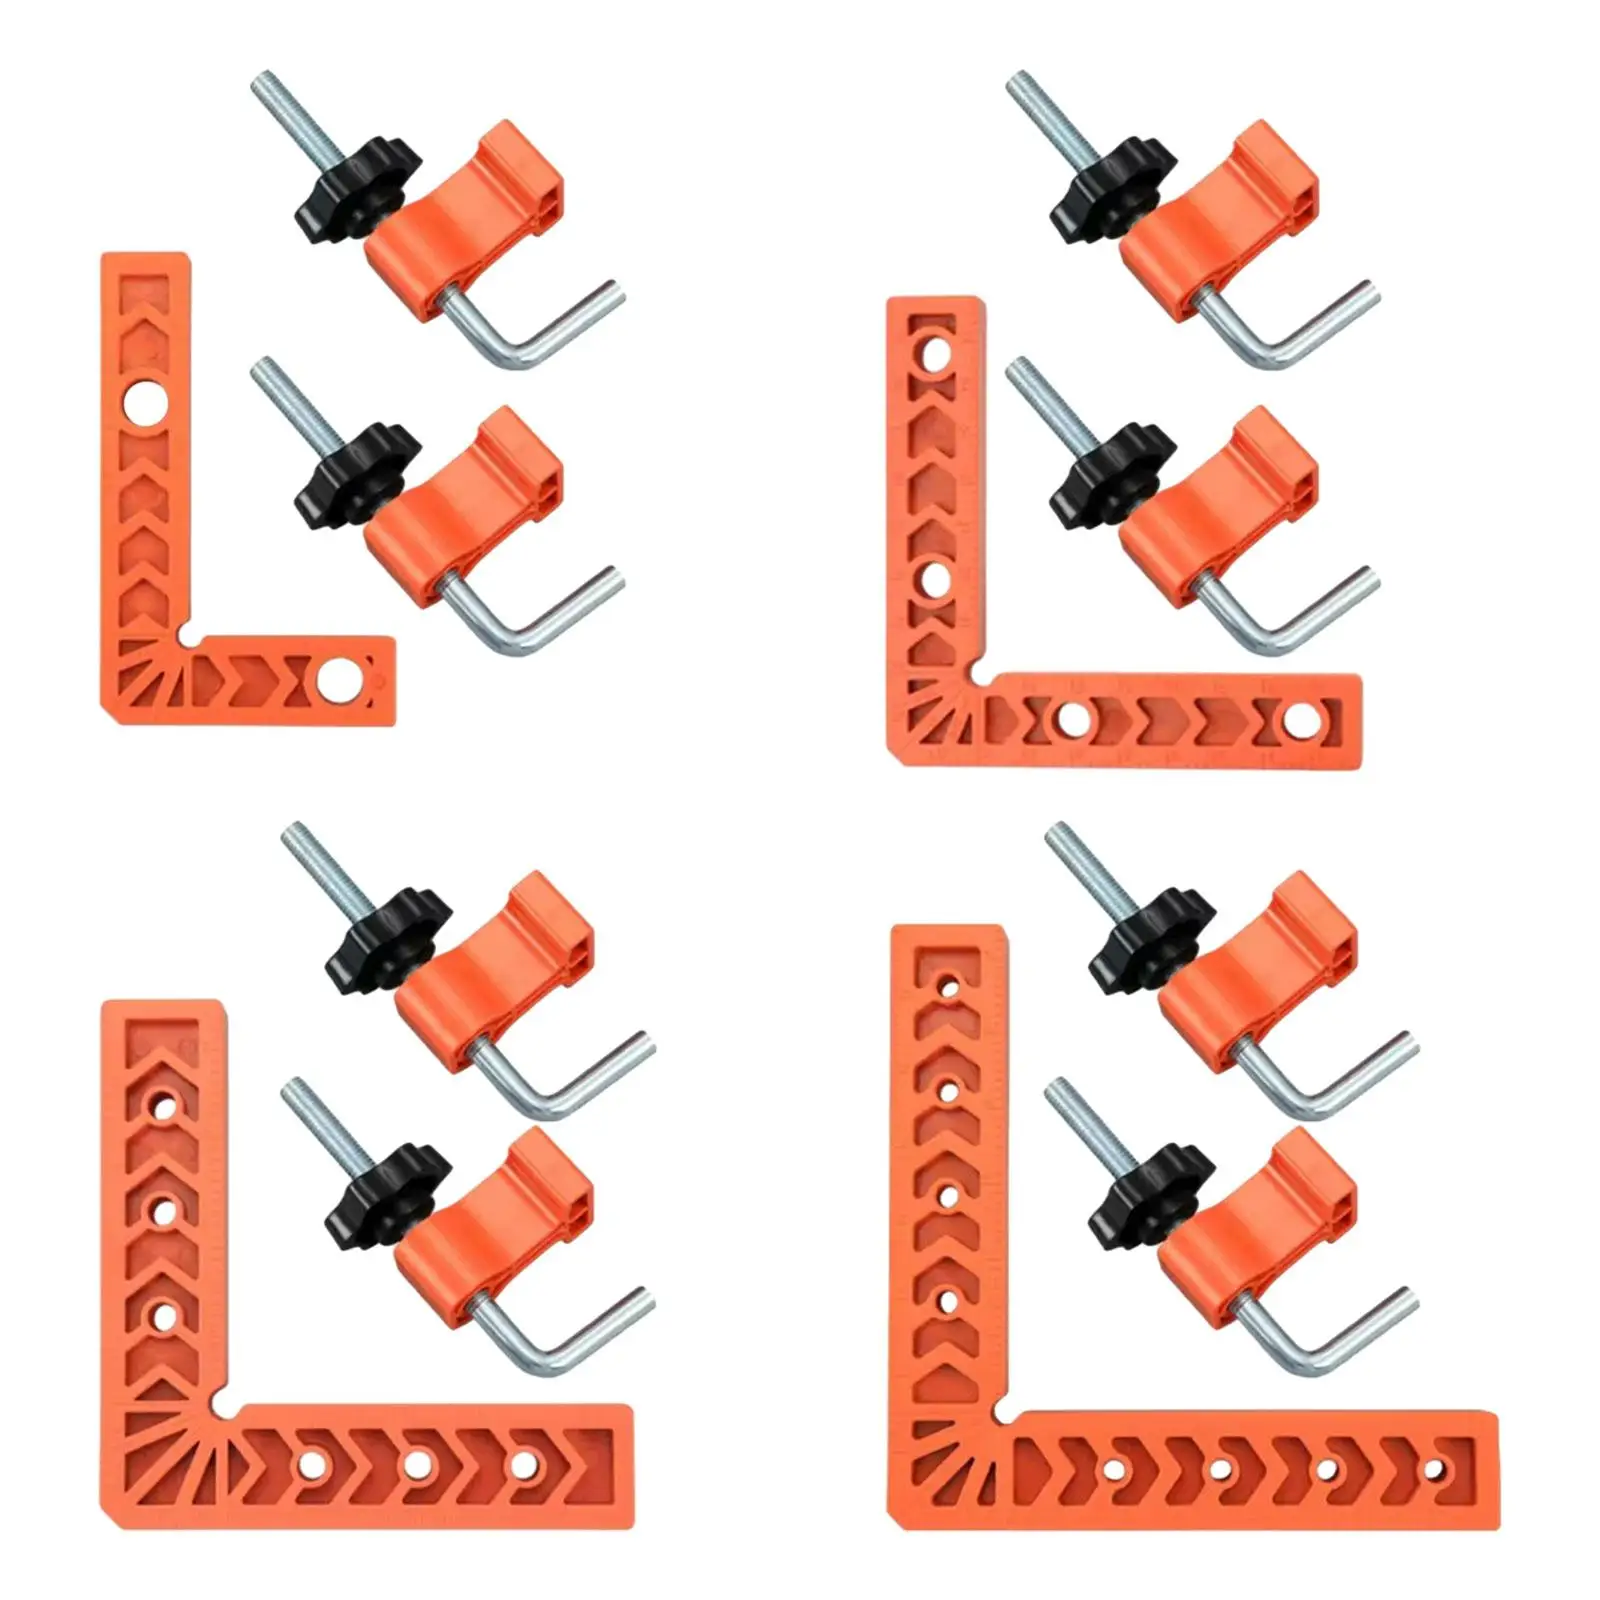 90 Degree Corner Clamp Carpentry Squares Professional L Type Woodworking Tool Positioning Square for Cabinets, Picture Frames